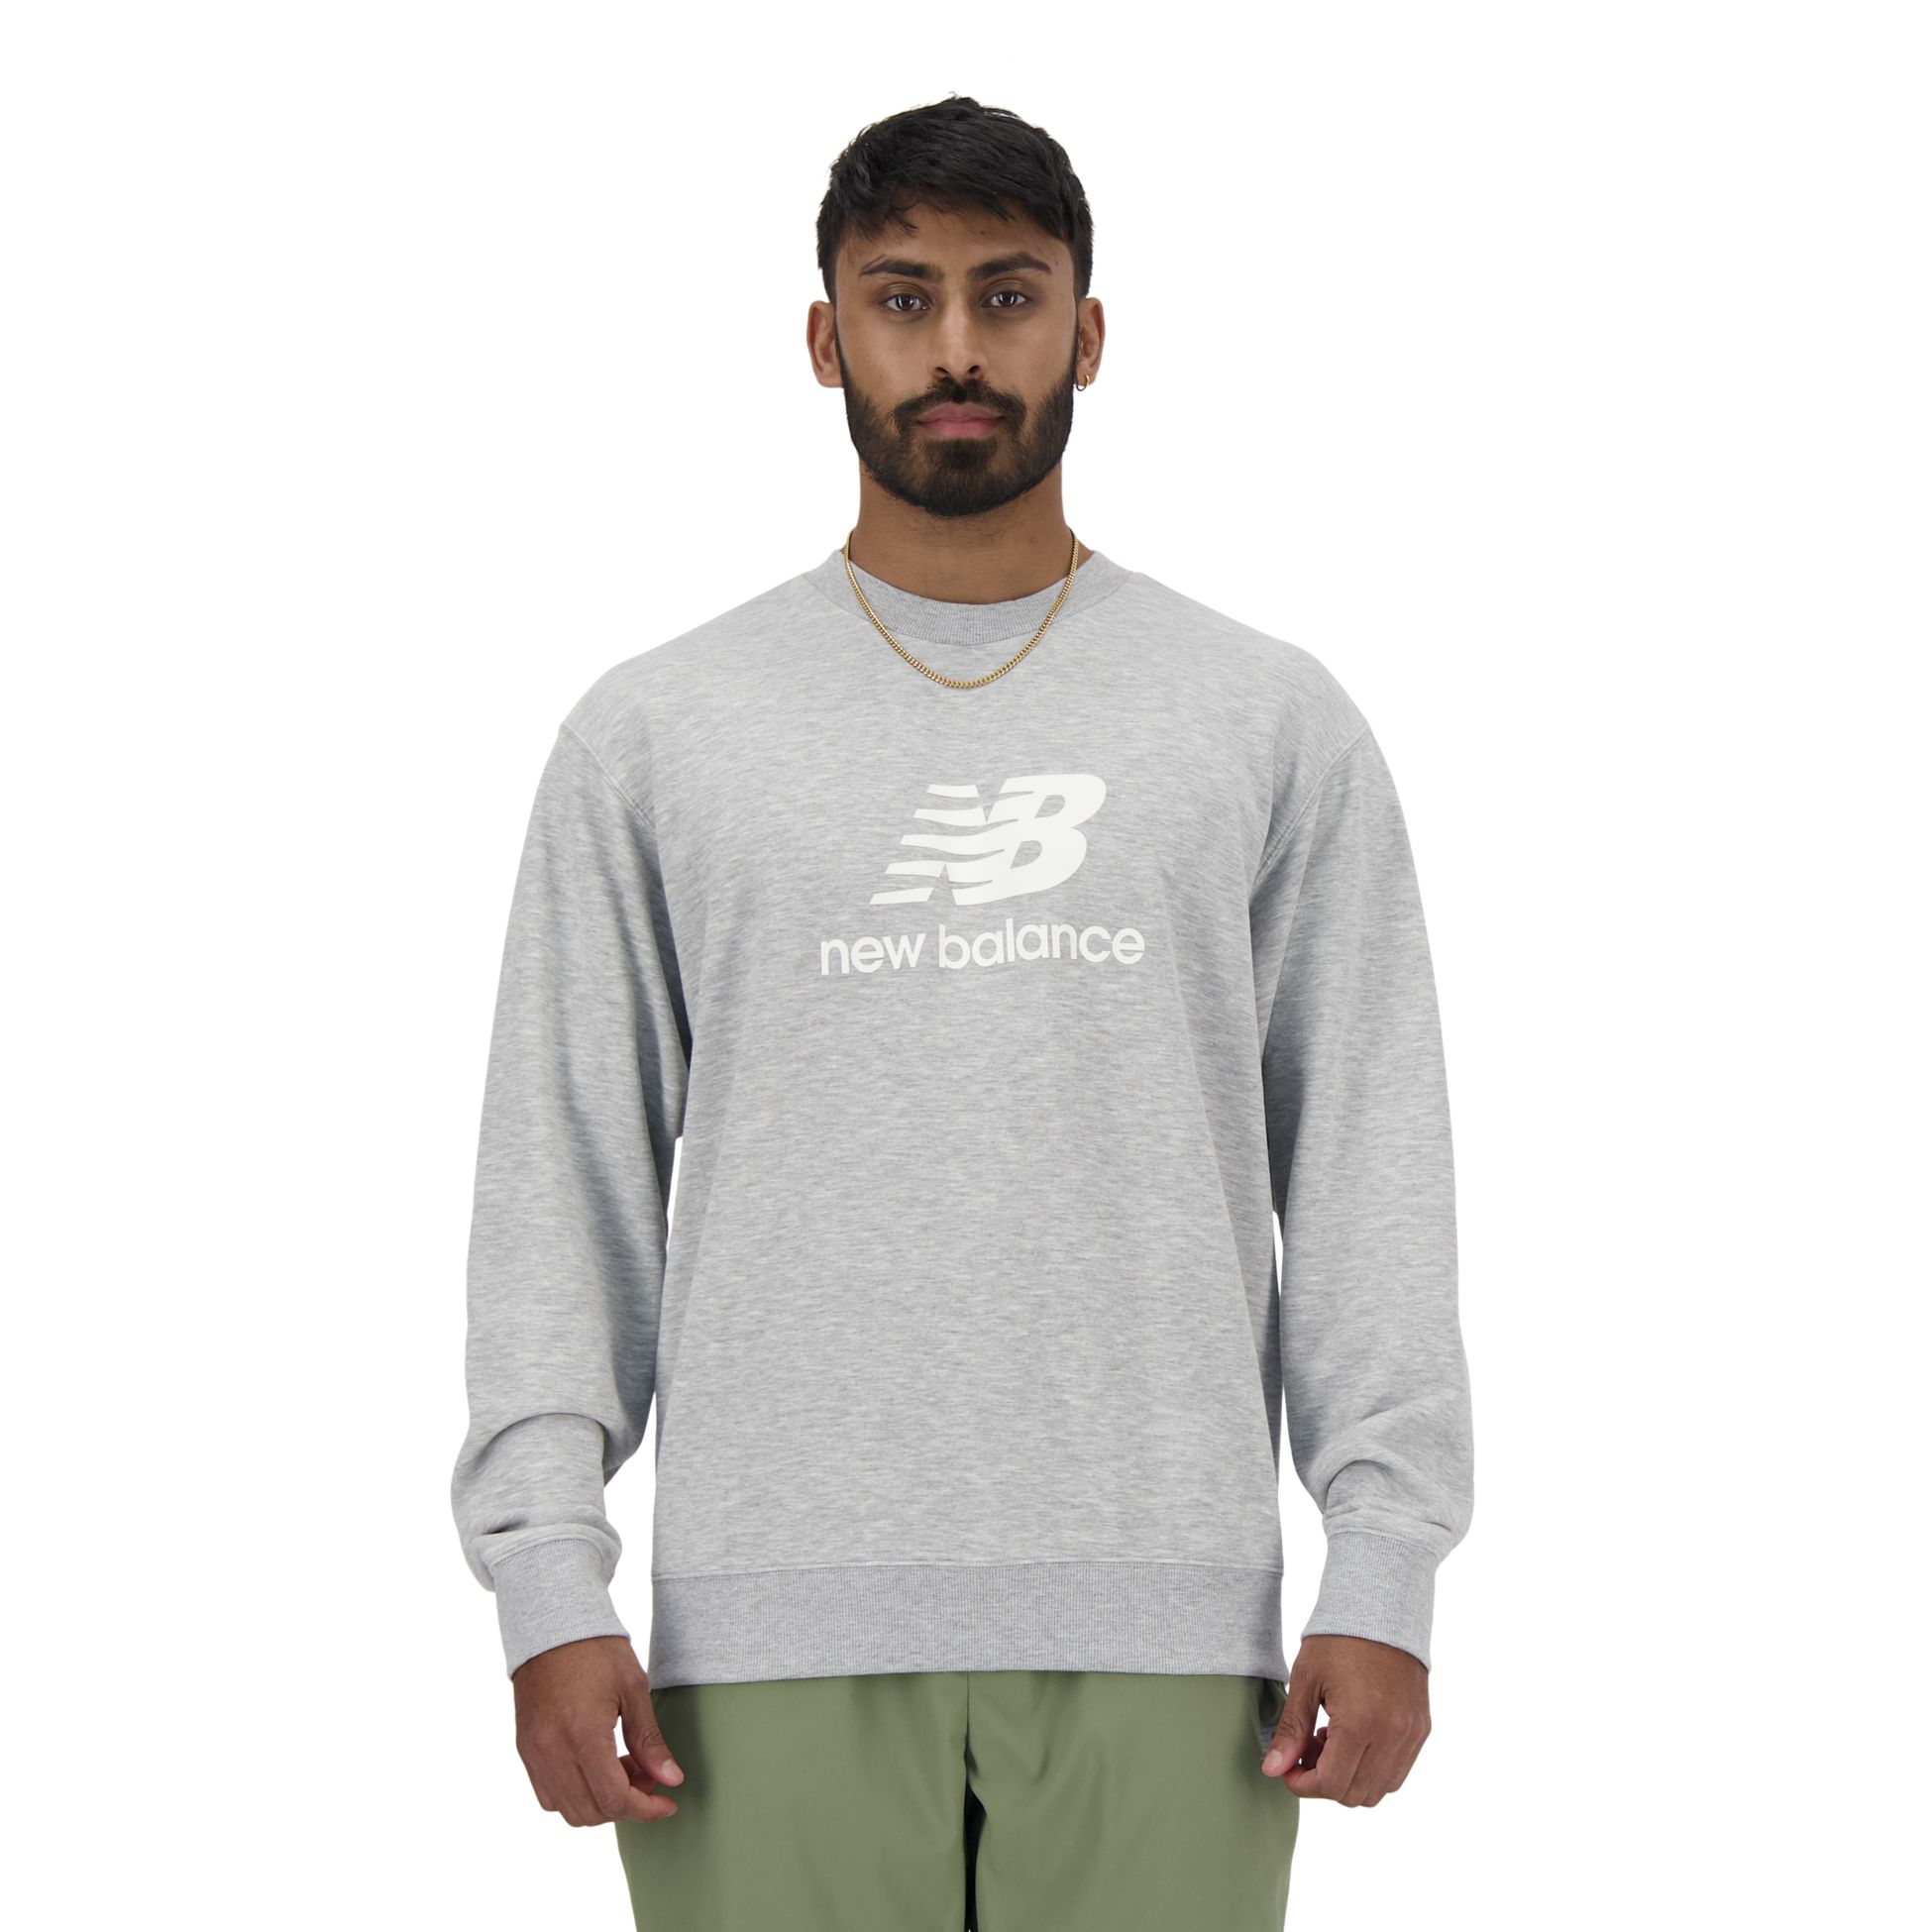 NEW BALANCE, STACKED LOGO FRENCH TERRY CREW